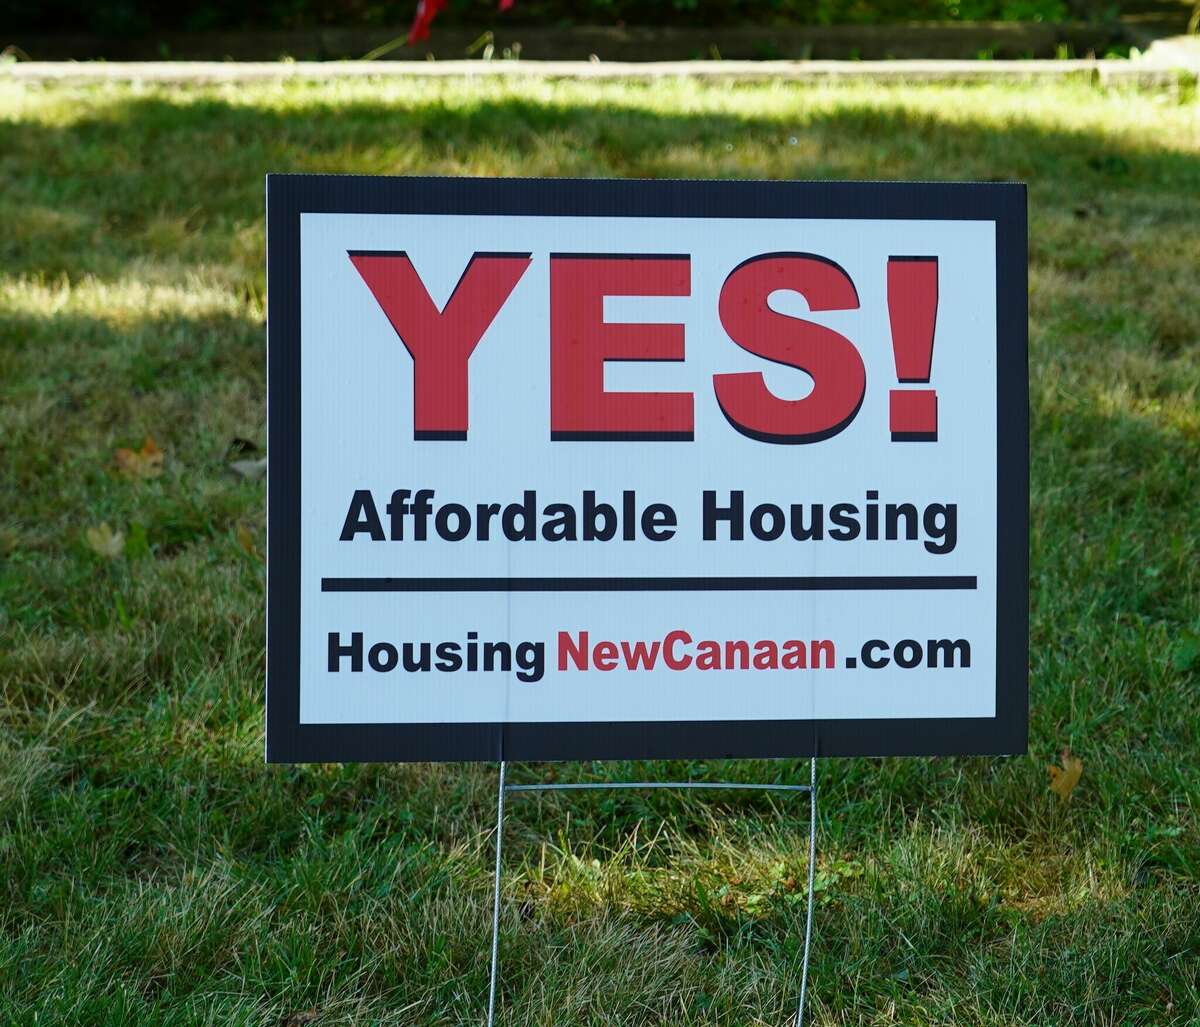 Developer Arnold Karp put up signs around New Canaan, similar to ones against affordable housing.